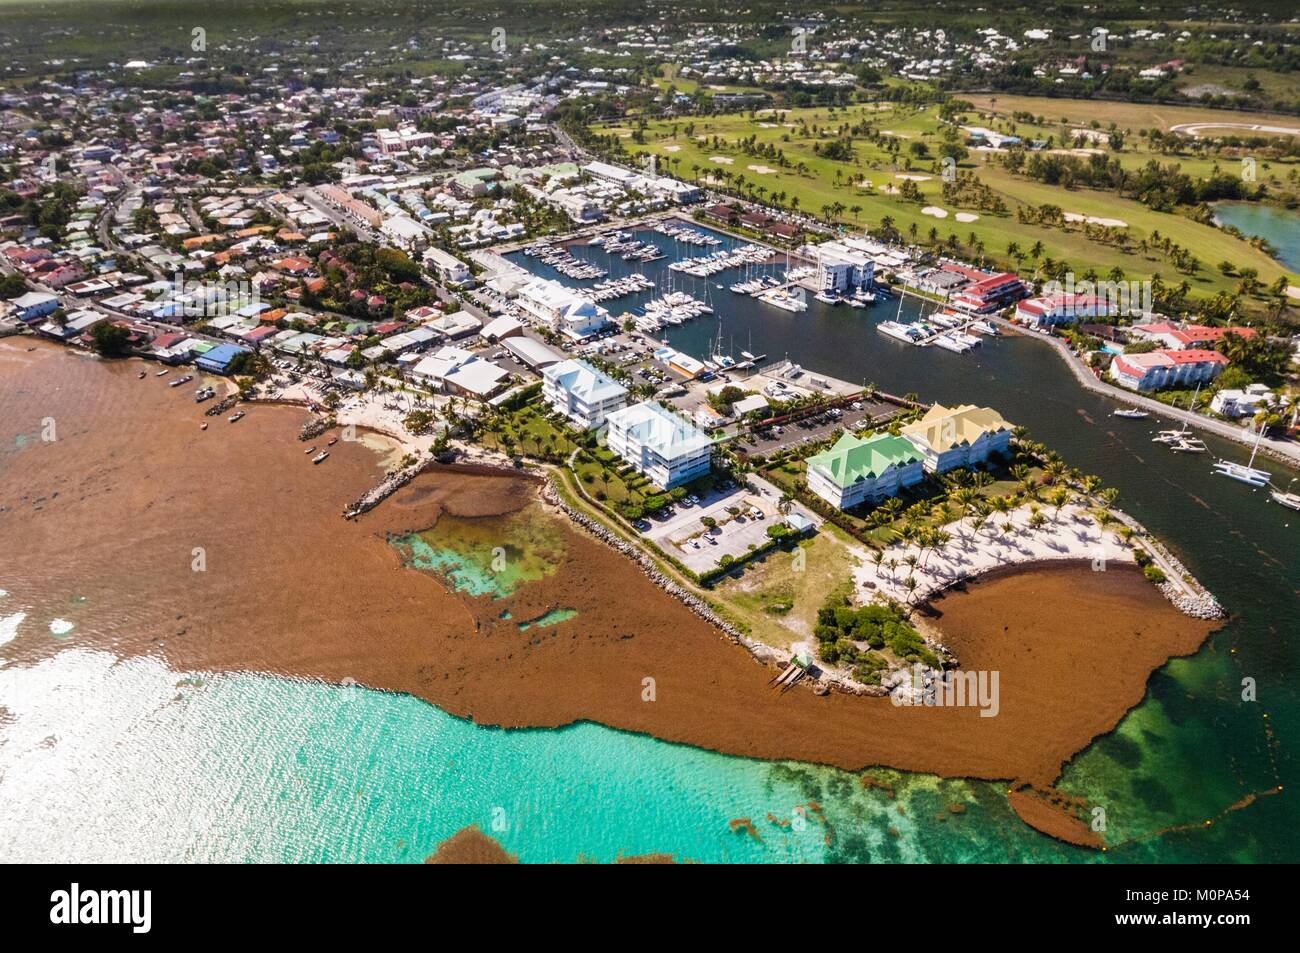 France,Caribbean,Lesser Antilles,Guadeloupe,Grande-Terre,Saint-François,Aerial view of the marina invaded by brown algae (Sargassum) (aerial view) Stock Photo